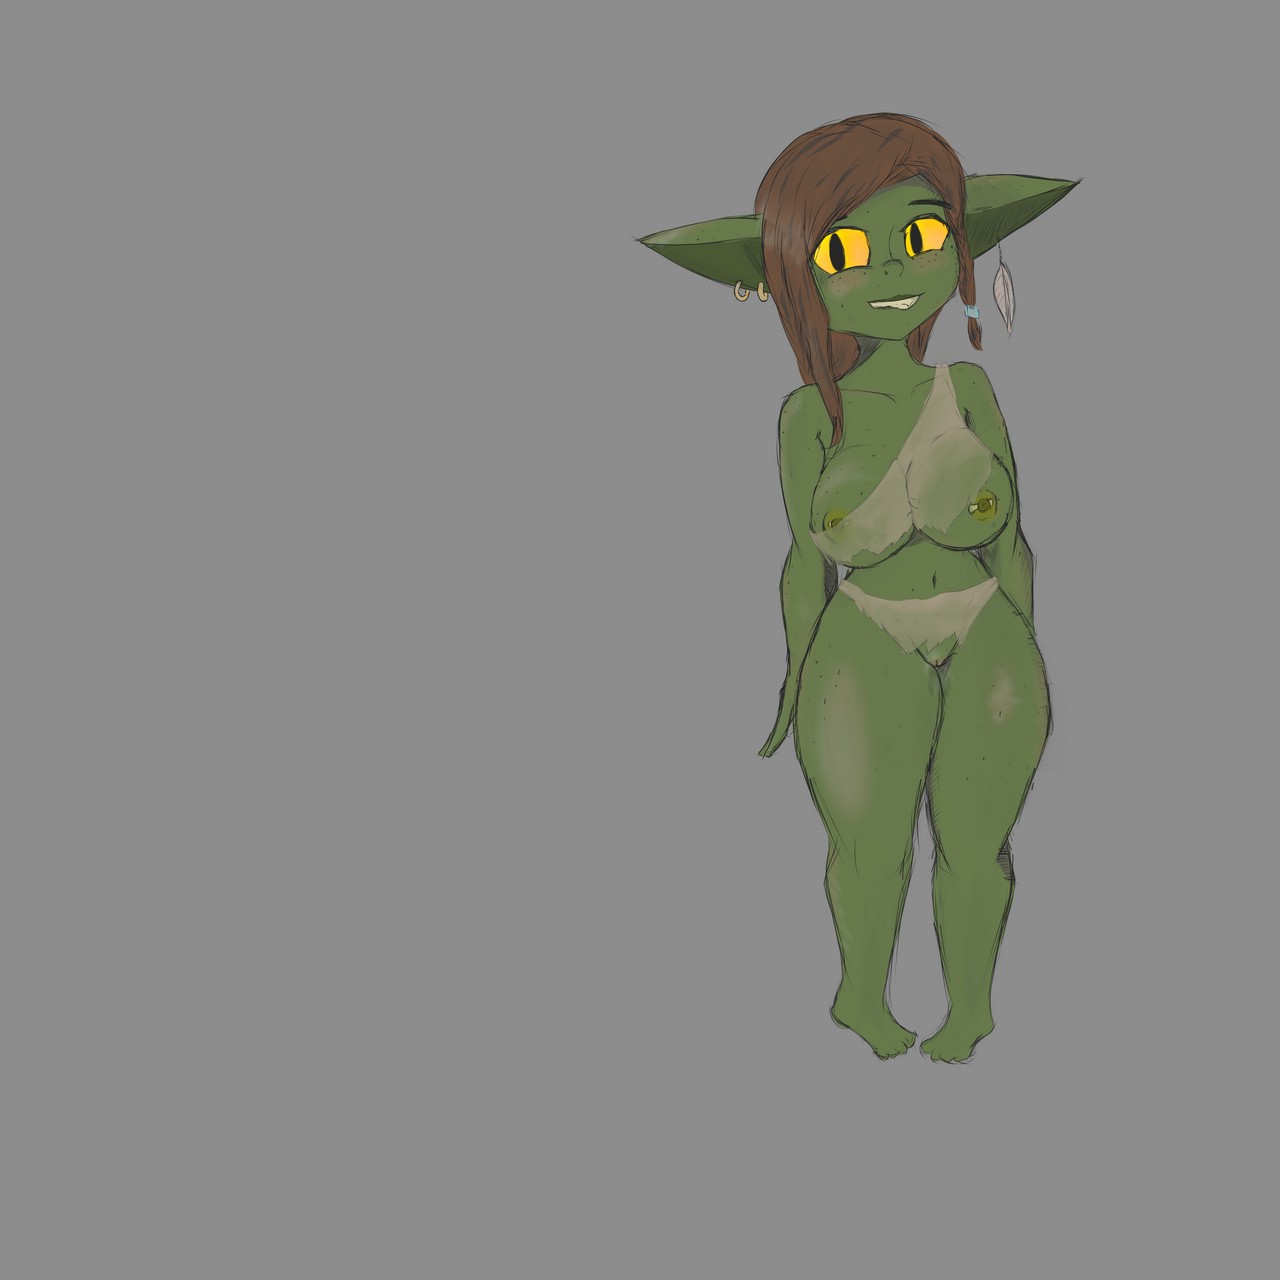 Decided To Make The Gobbo An Official Oc Of Mine